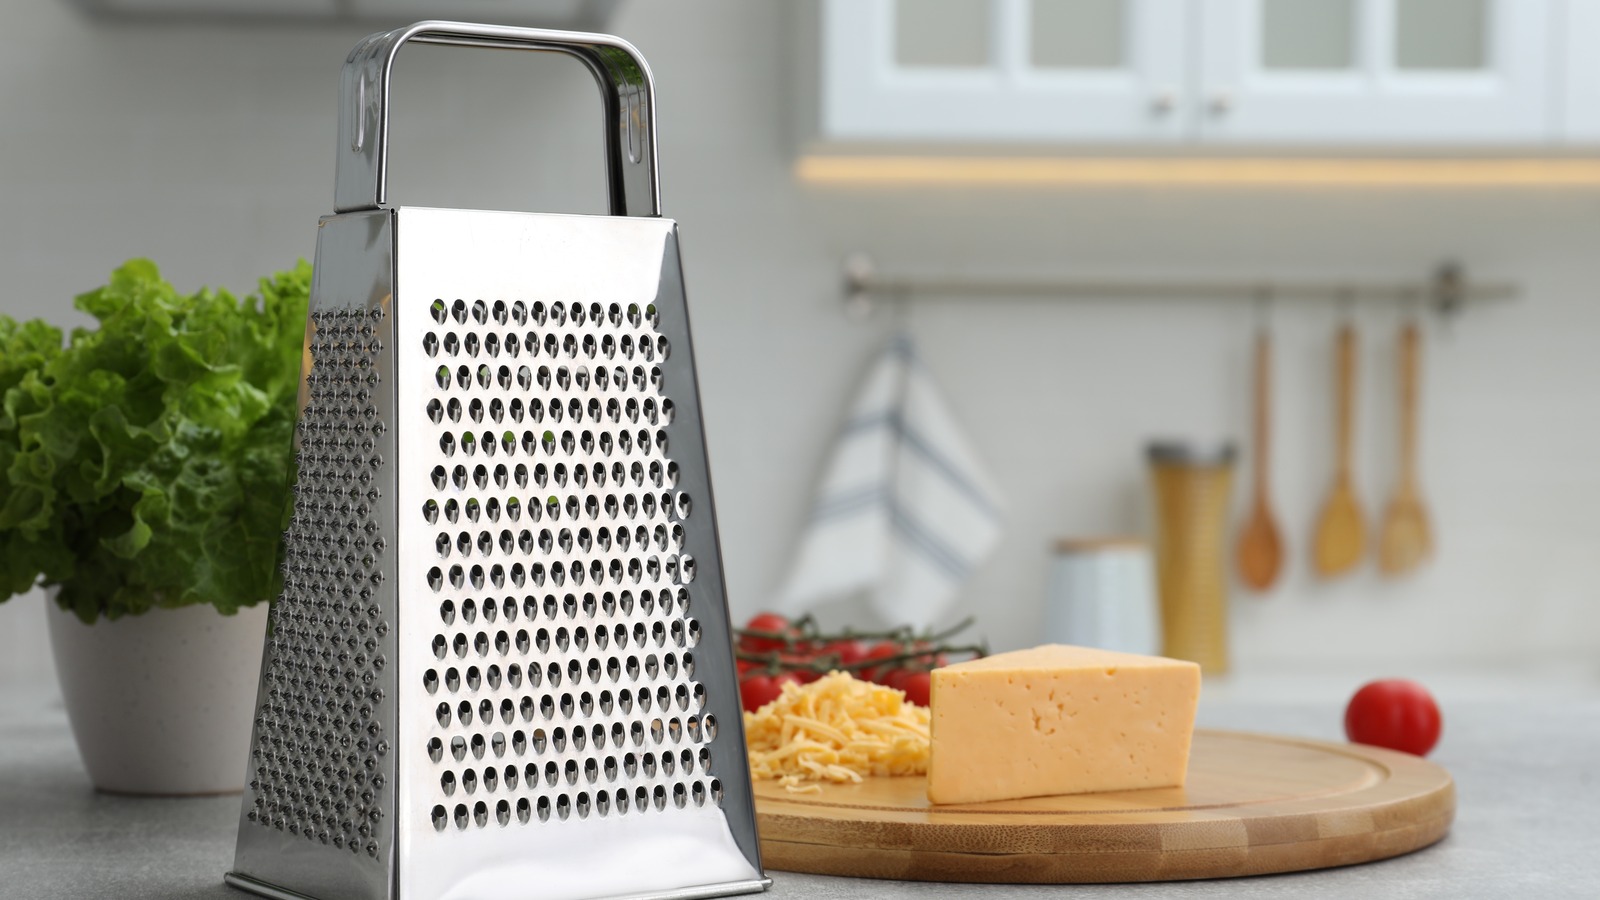 How To Properly And Quickly Clean Your Cheese Grater